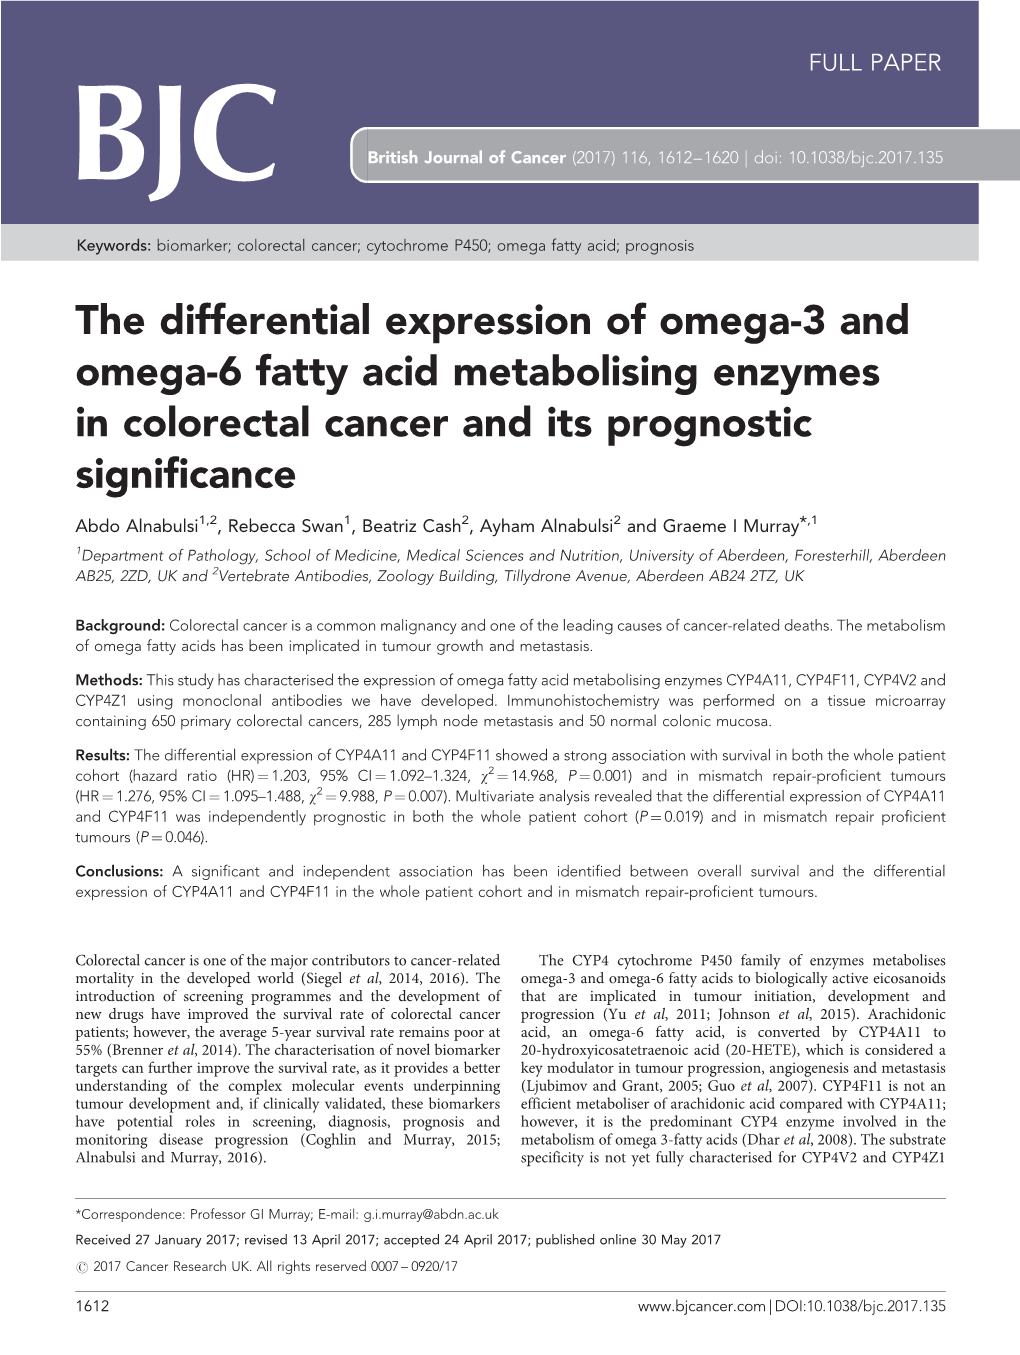 The Differential Expression of Omega-3 and Omega-6 Fatty Acid Metabolising Enzymes in Colorectal Cancer and Its Prognostic Significance